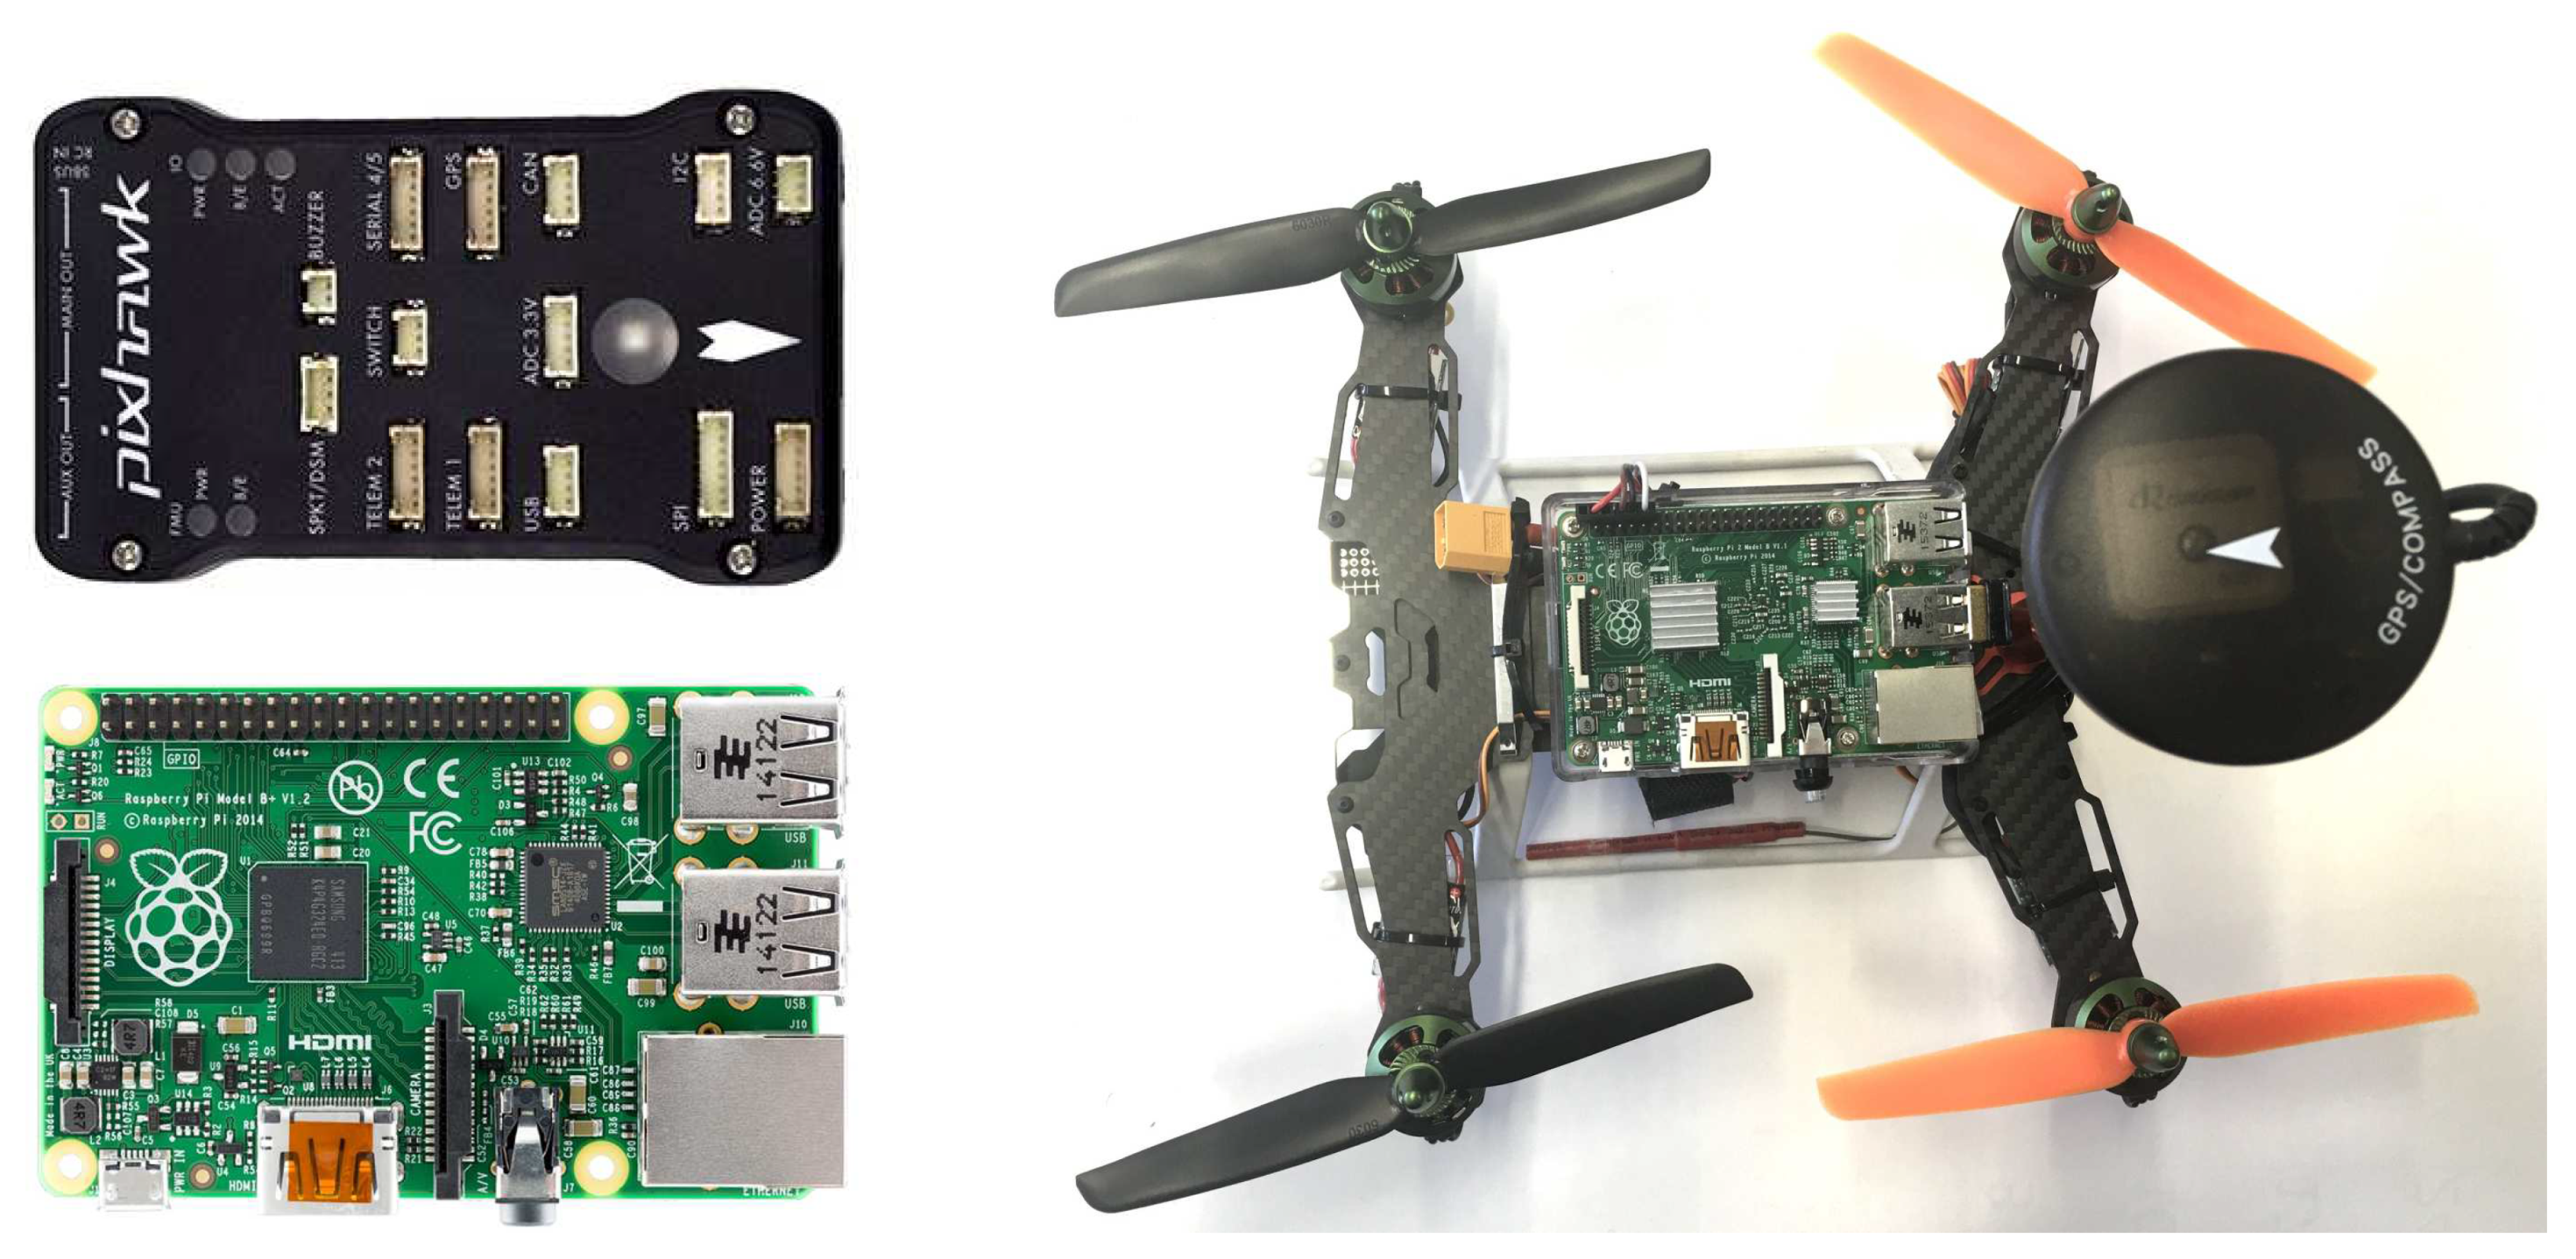 Drones | Free Full-Text | Review: Using Unmanned Aerial Vehicles (UAVs) as  Mobile Sensing Platforms (MSPs) for Disaster Response, Civil Security and  Public Safety